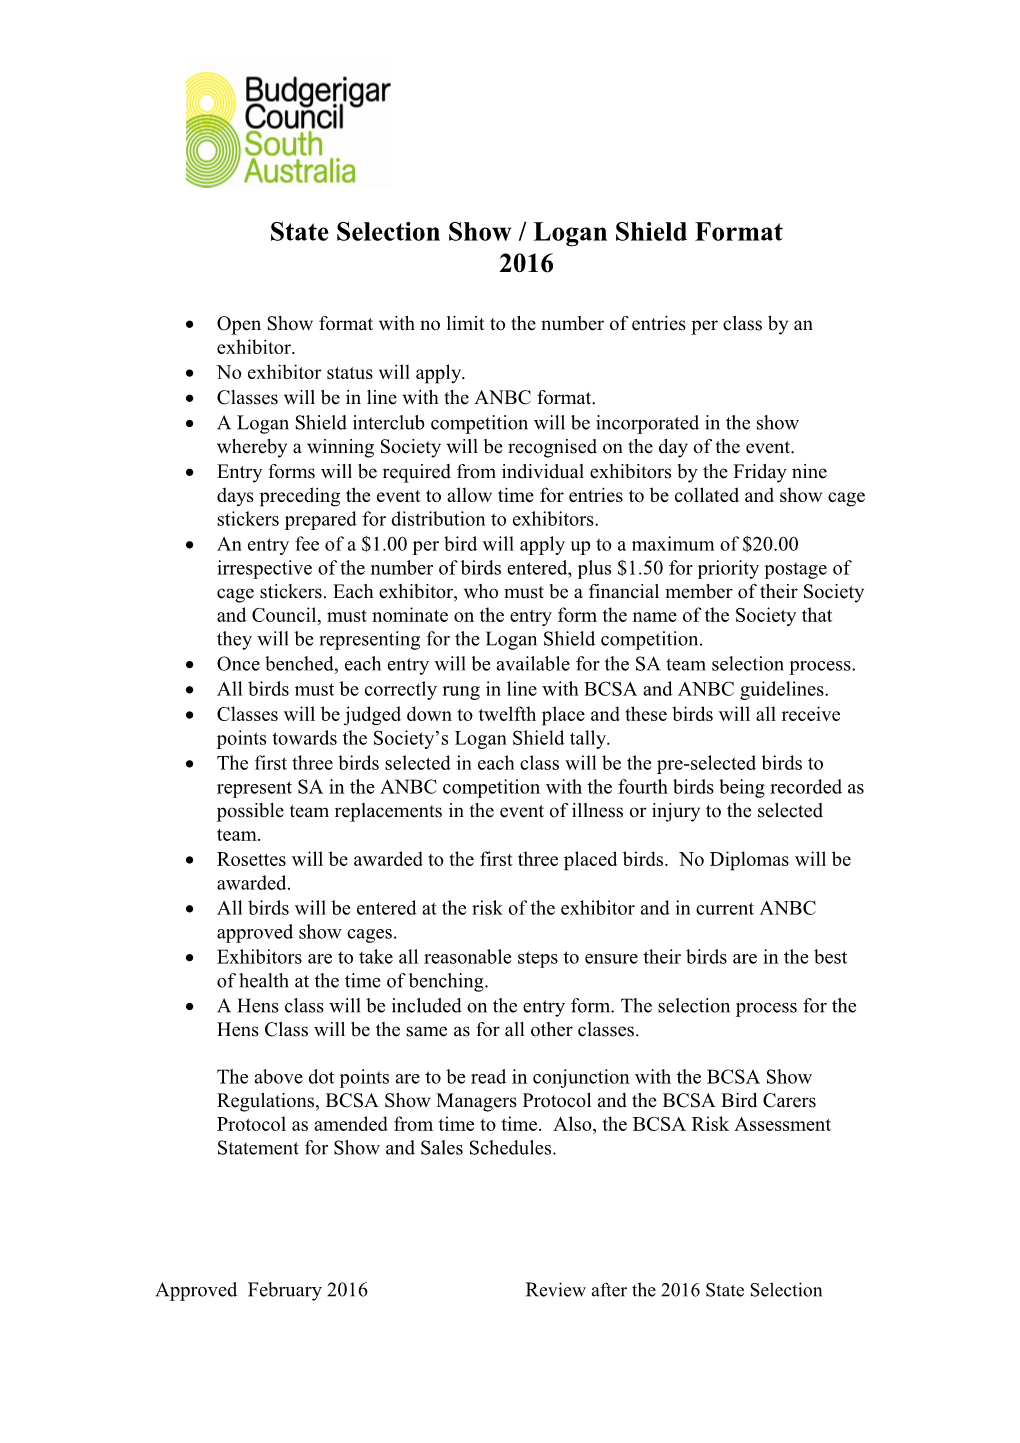 State Selection Show / Logan Shield Format